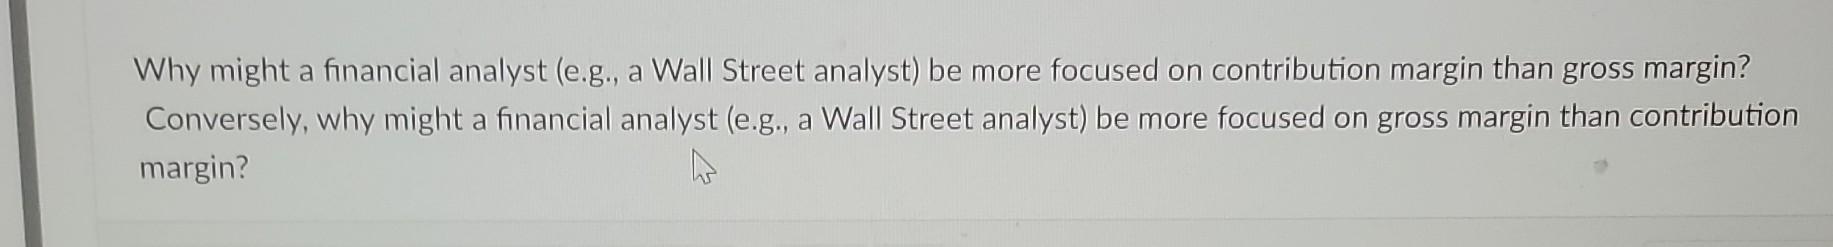 Why might a financial analyst (e.g., a Wall Street analyst) be more focused on contribution margin than gross